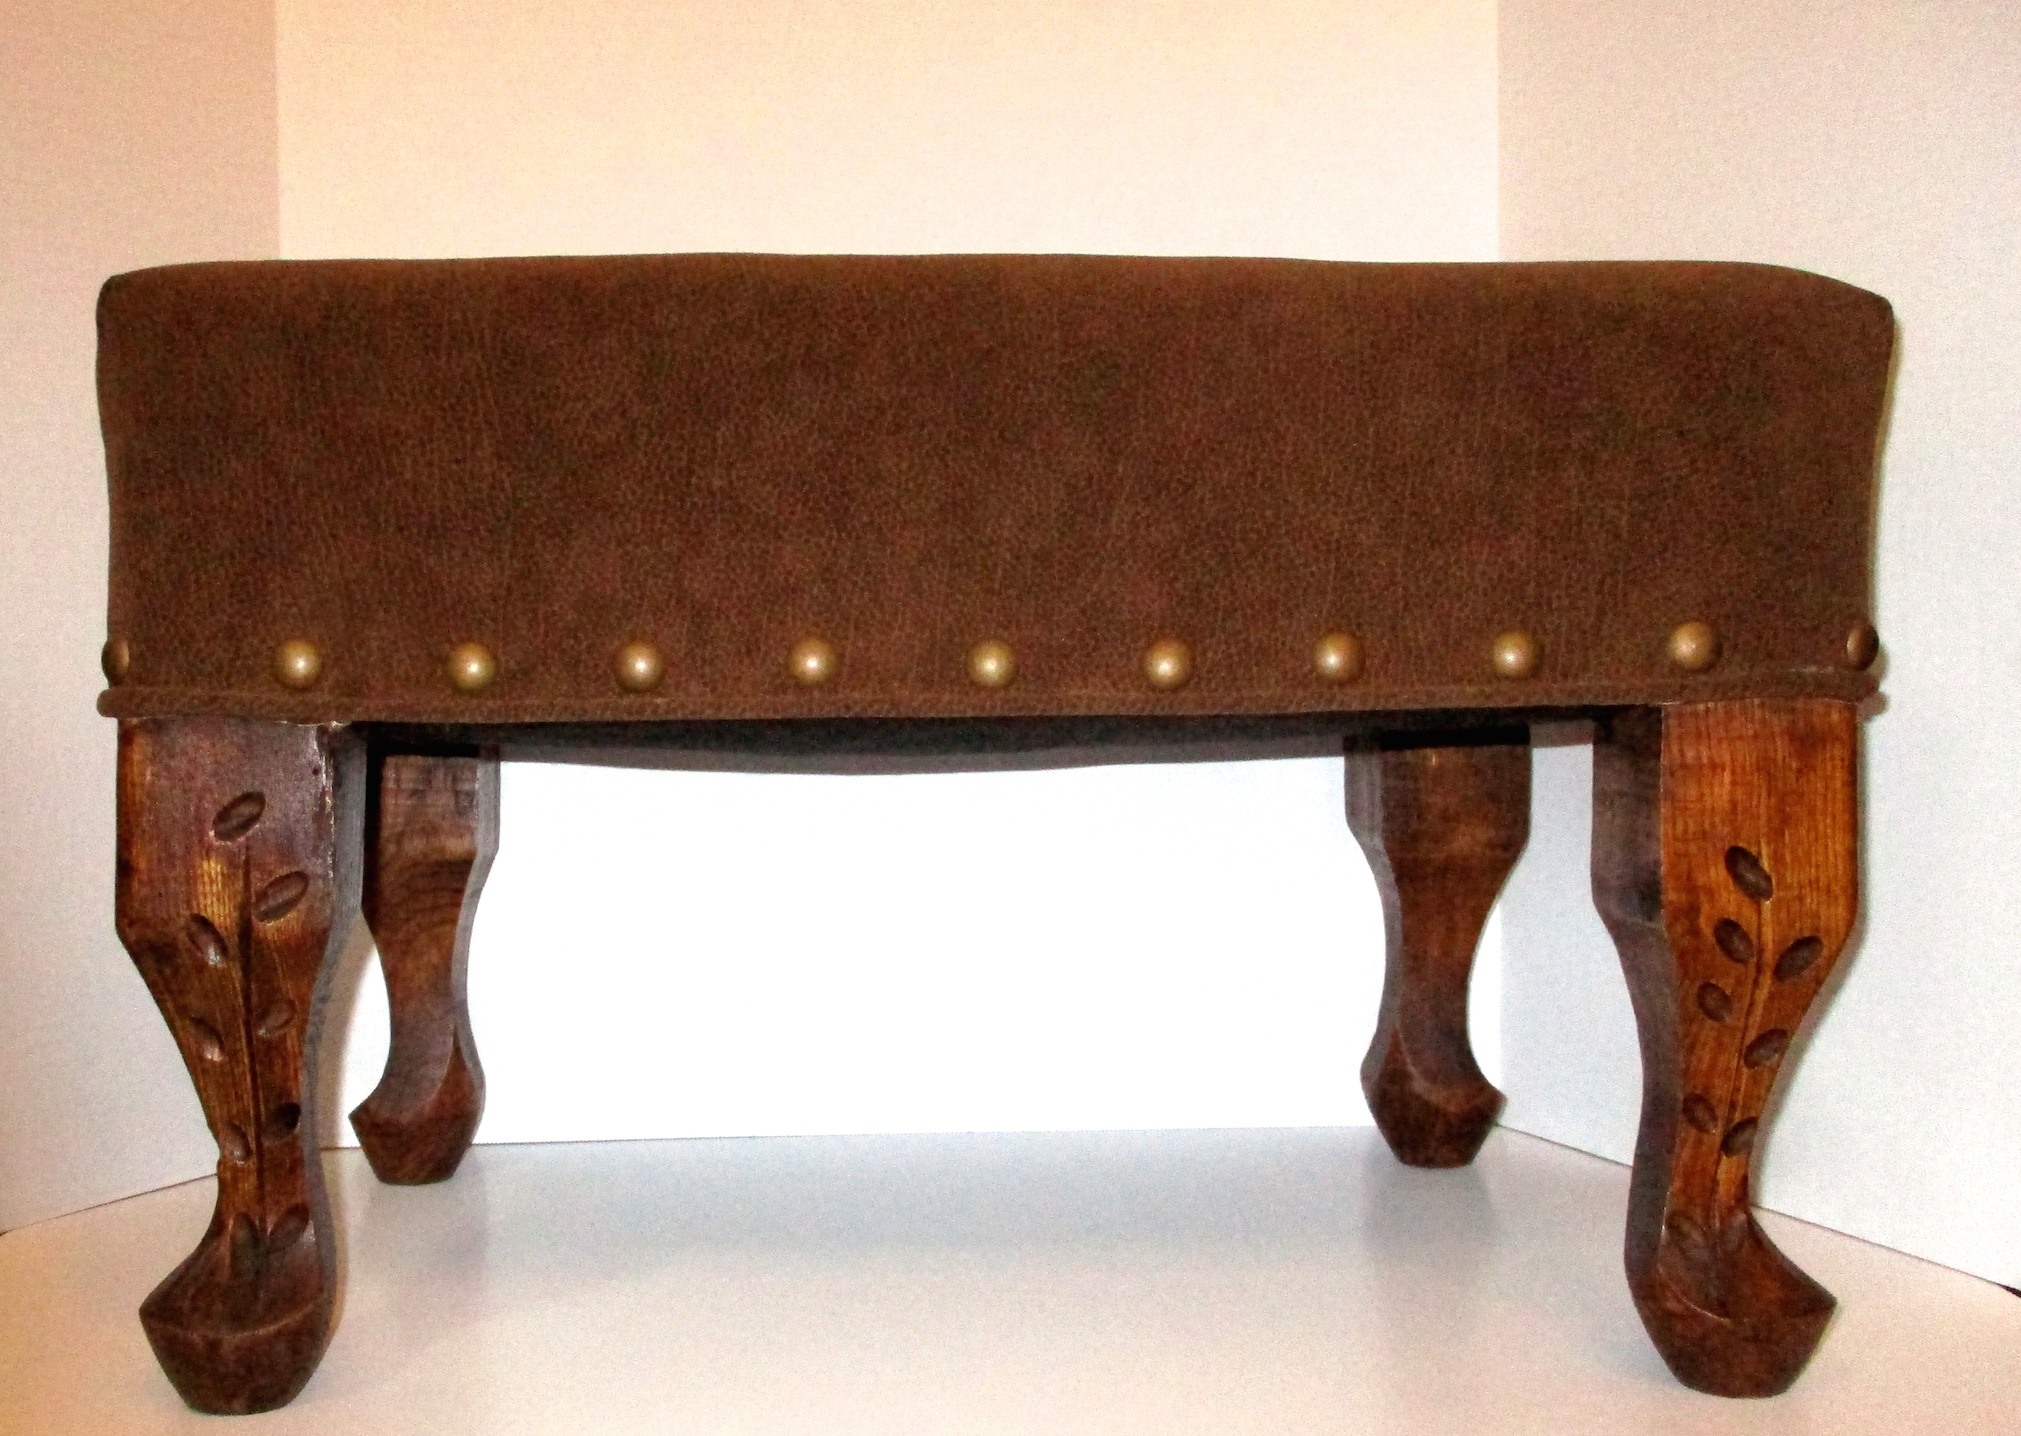 Upholstered Footstool w/Carved Legs - (15" W x 21" L x 14" H)